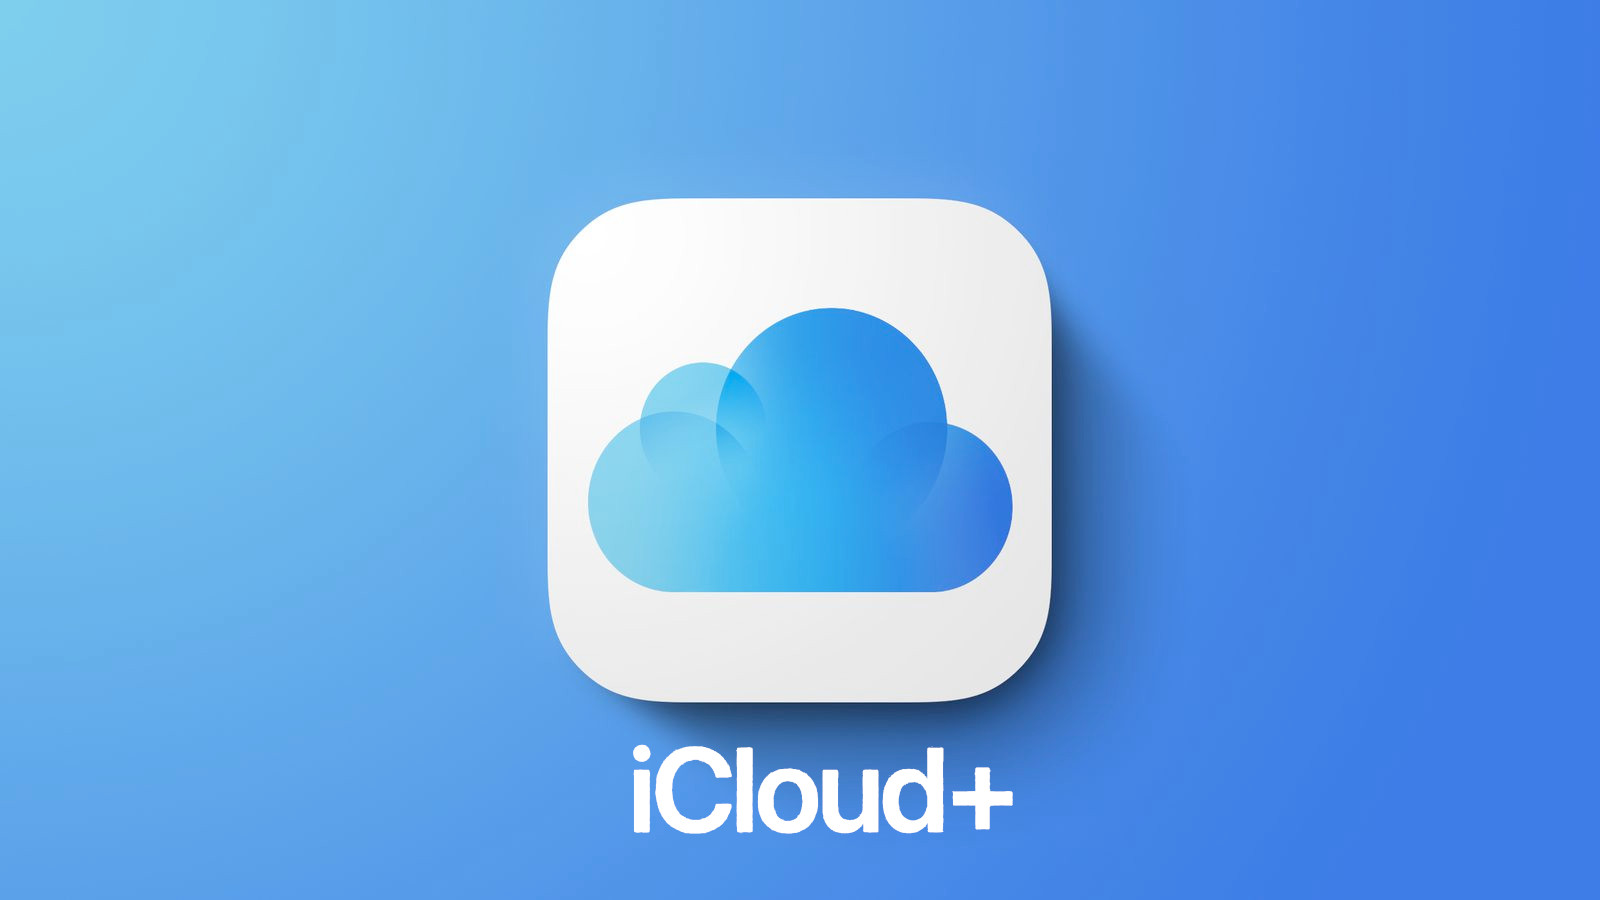 iCloud+ 50GB - 3 Months Trial Subscription US (ONLY FOR NEW ACCOUNTS) [USD 0.31]